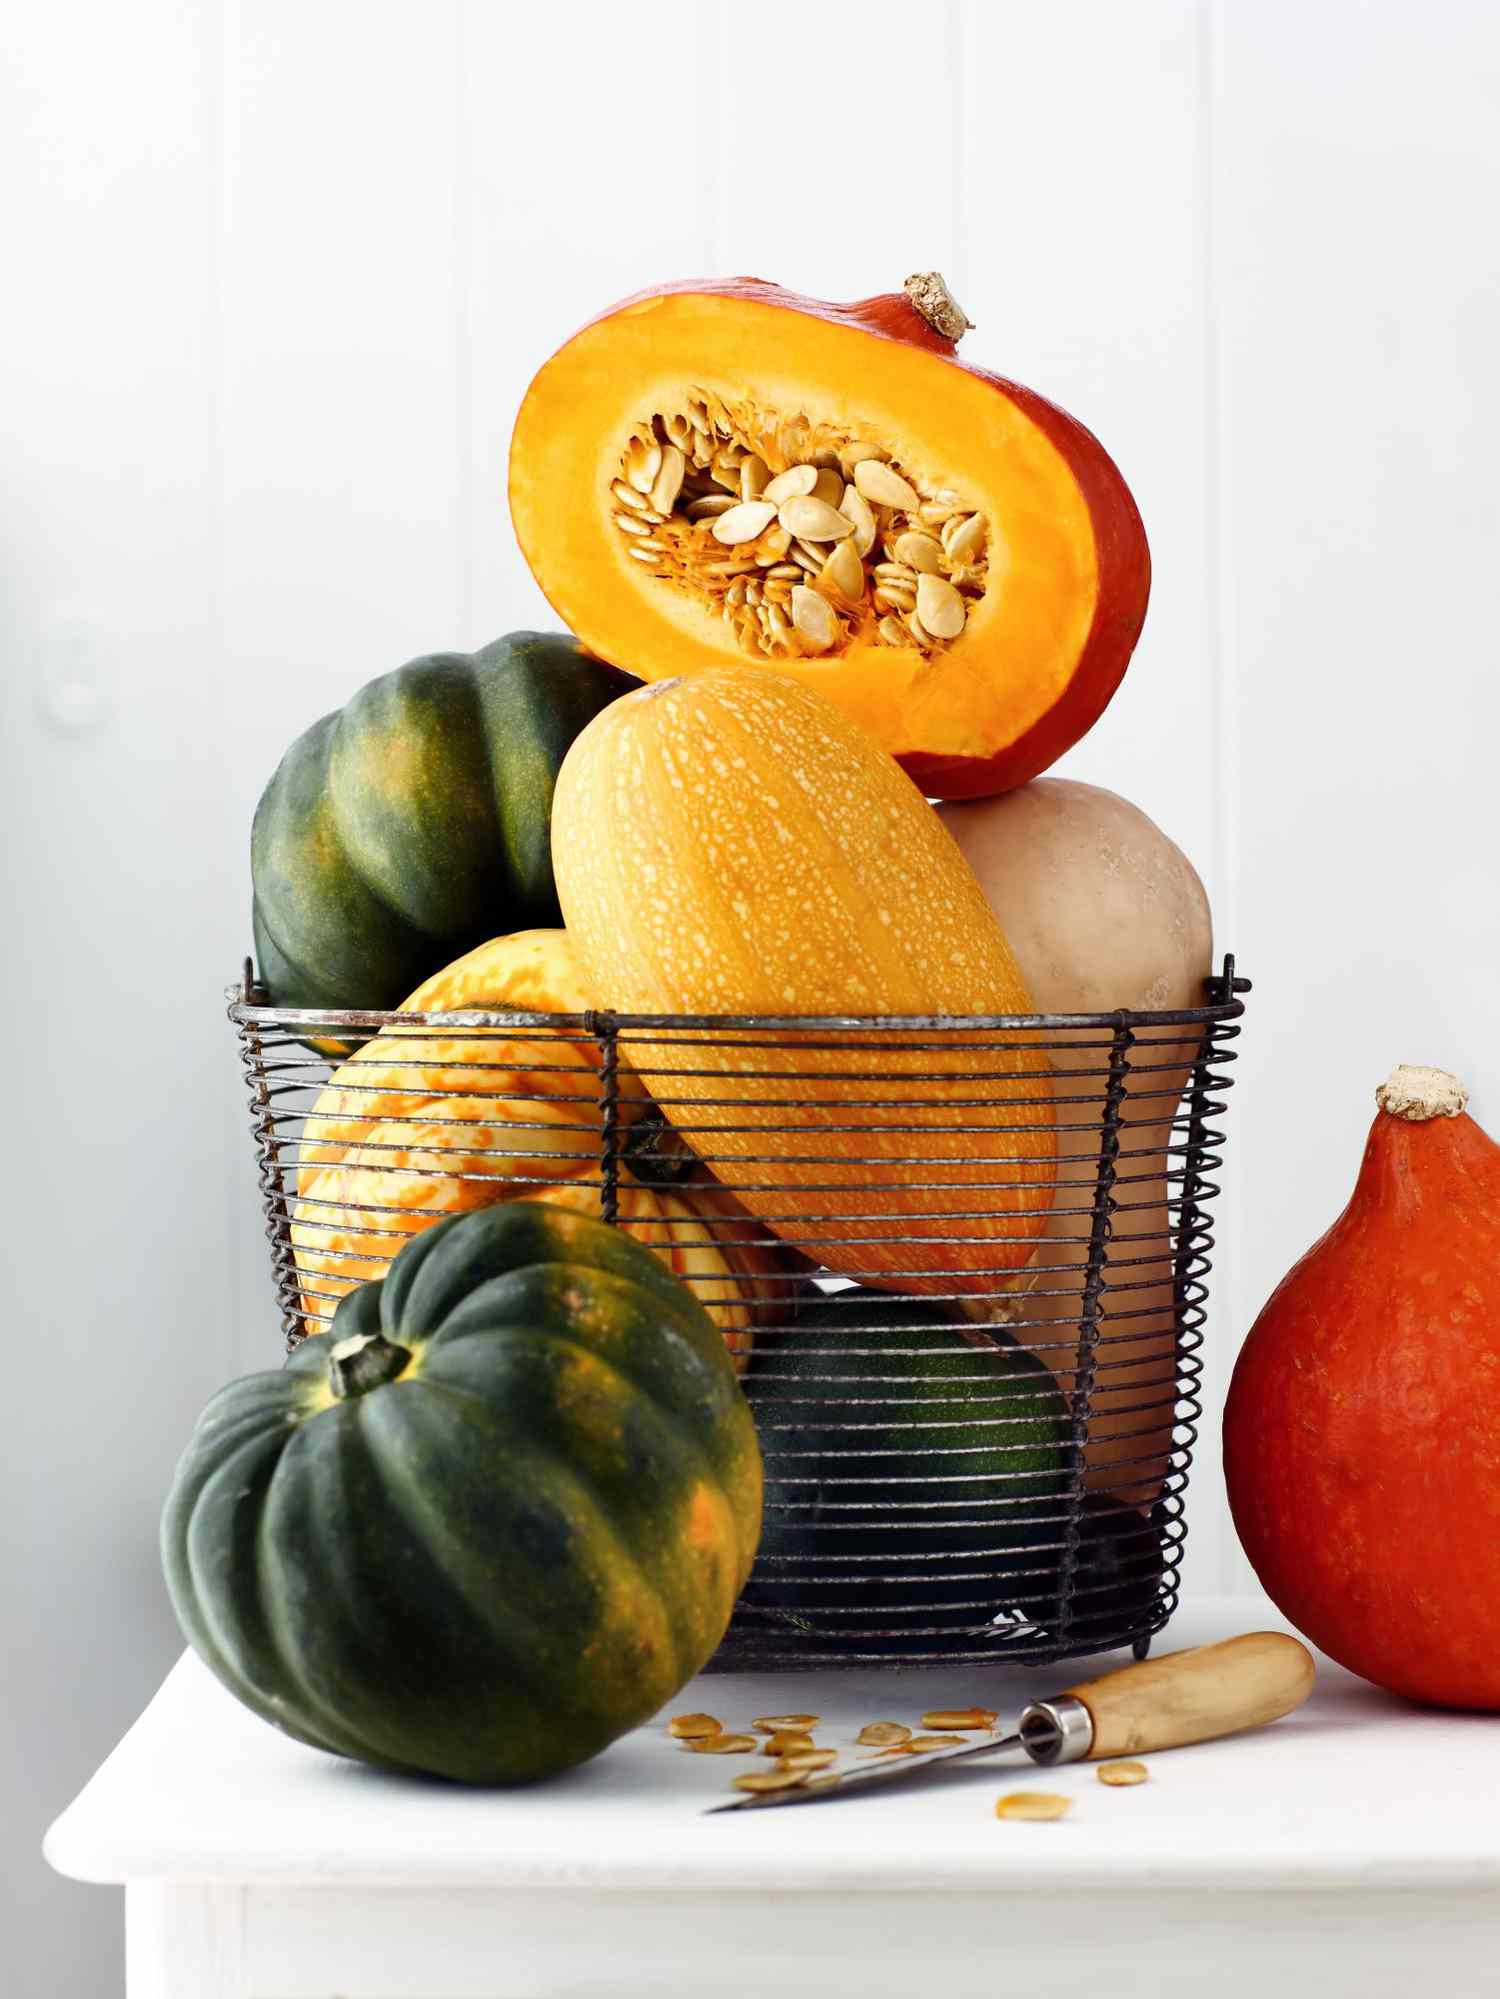 Variety of squashes on sideboard one cut open